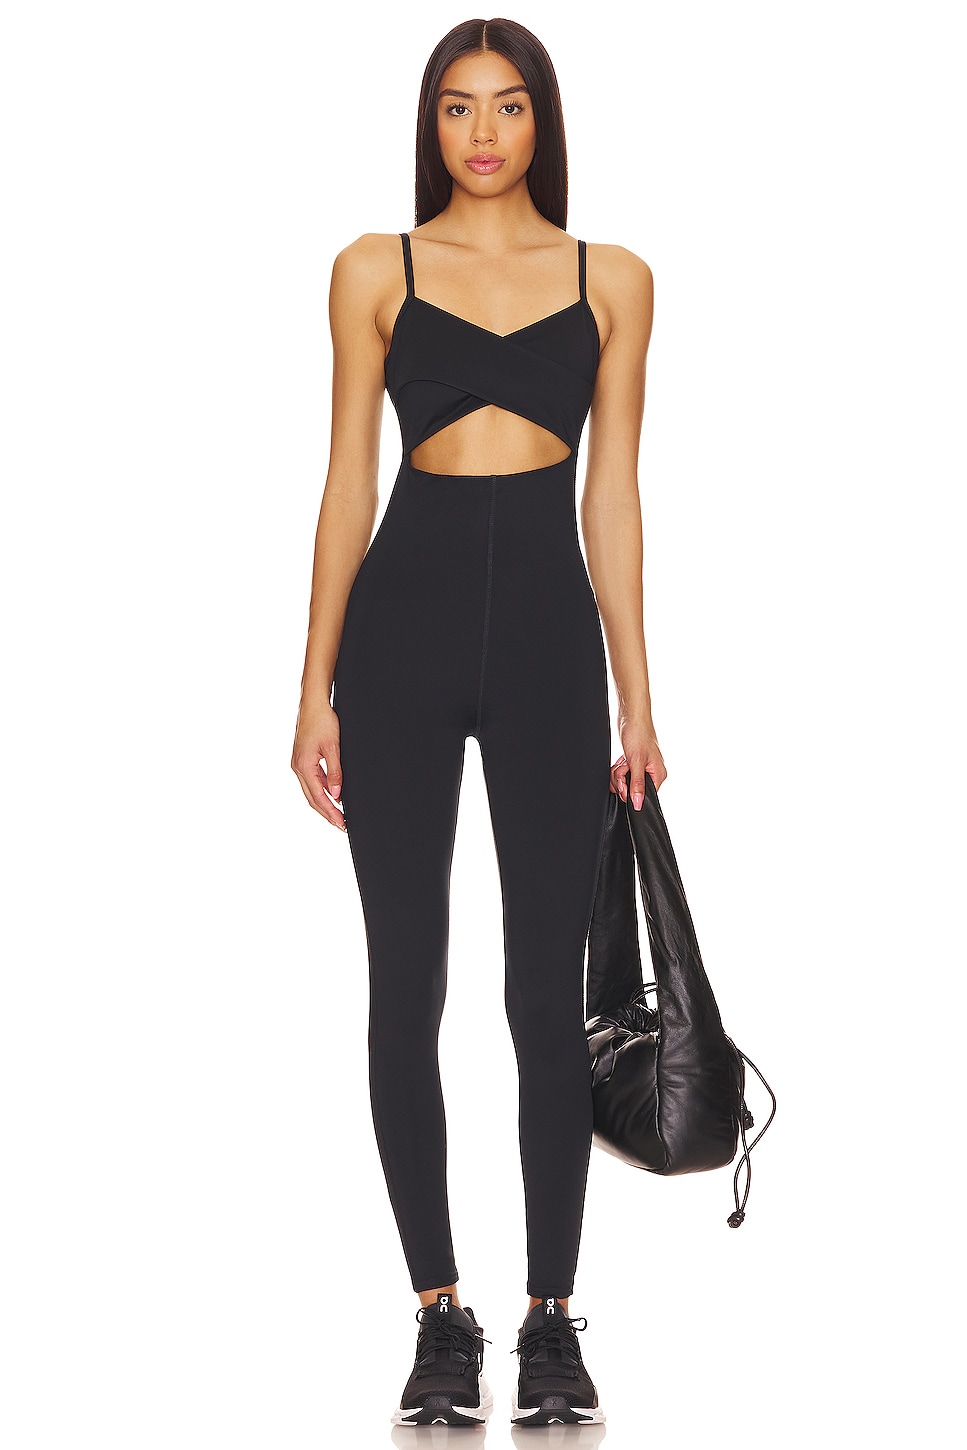 WellBeing + BeingWell FlowWell Saylor Jumpsuit in Black